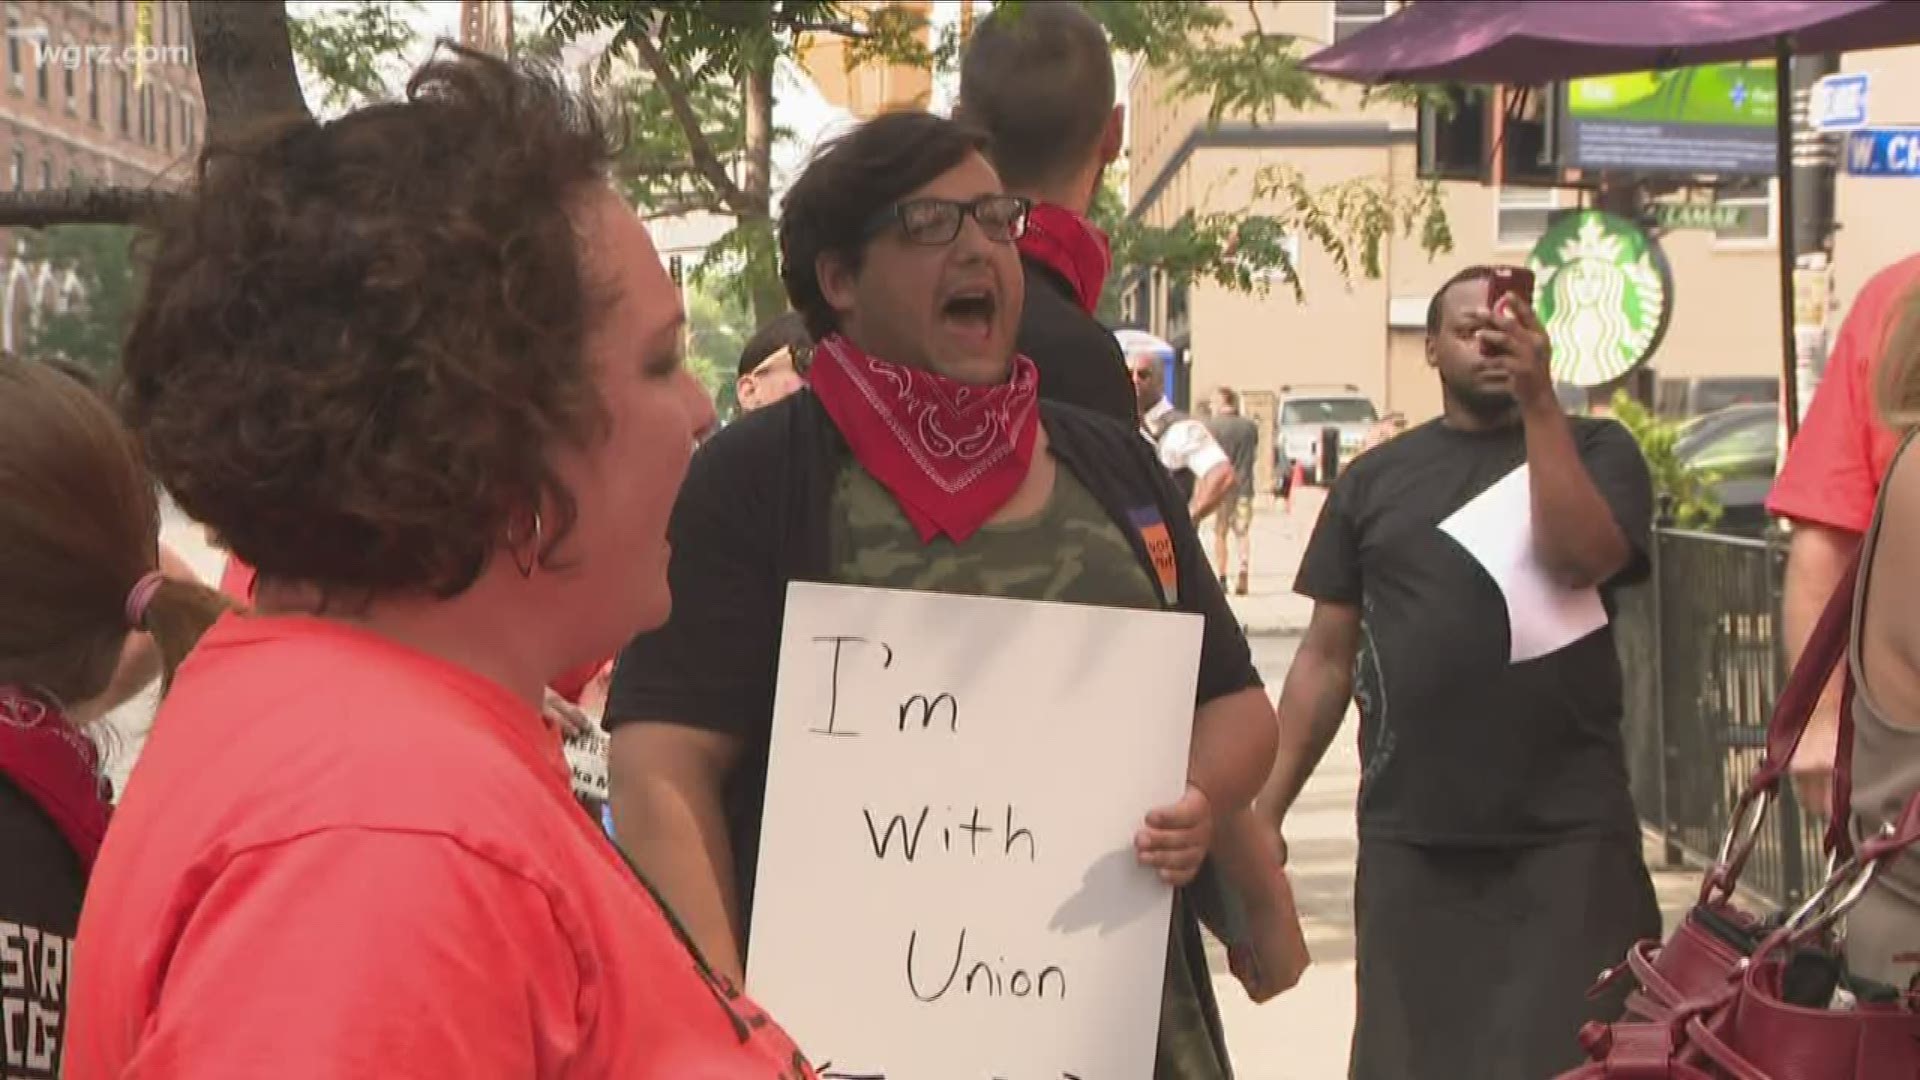 A group was protesting outside the spot coffee shop on Delaware and Chippewa this afternoon.